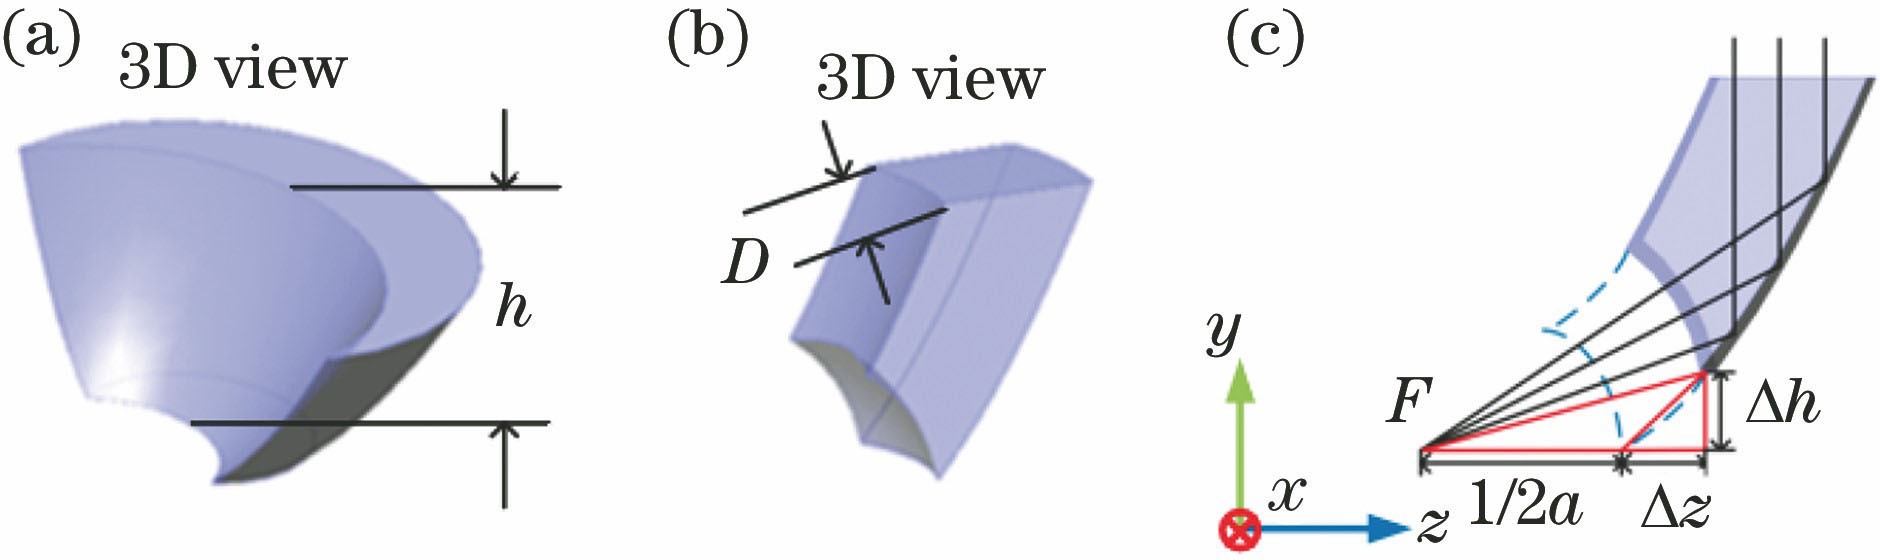 Clipping process of light collection module. (a) Double paraboloid structure; (b) structure is obtained by removing outer edge of double paraboloid structure and spherical part from lower surface; (c) height change of light collection module